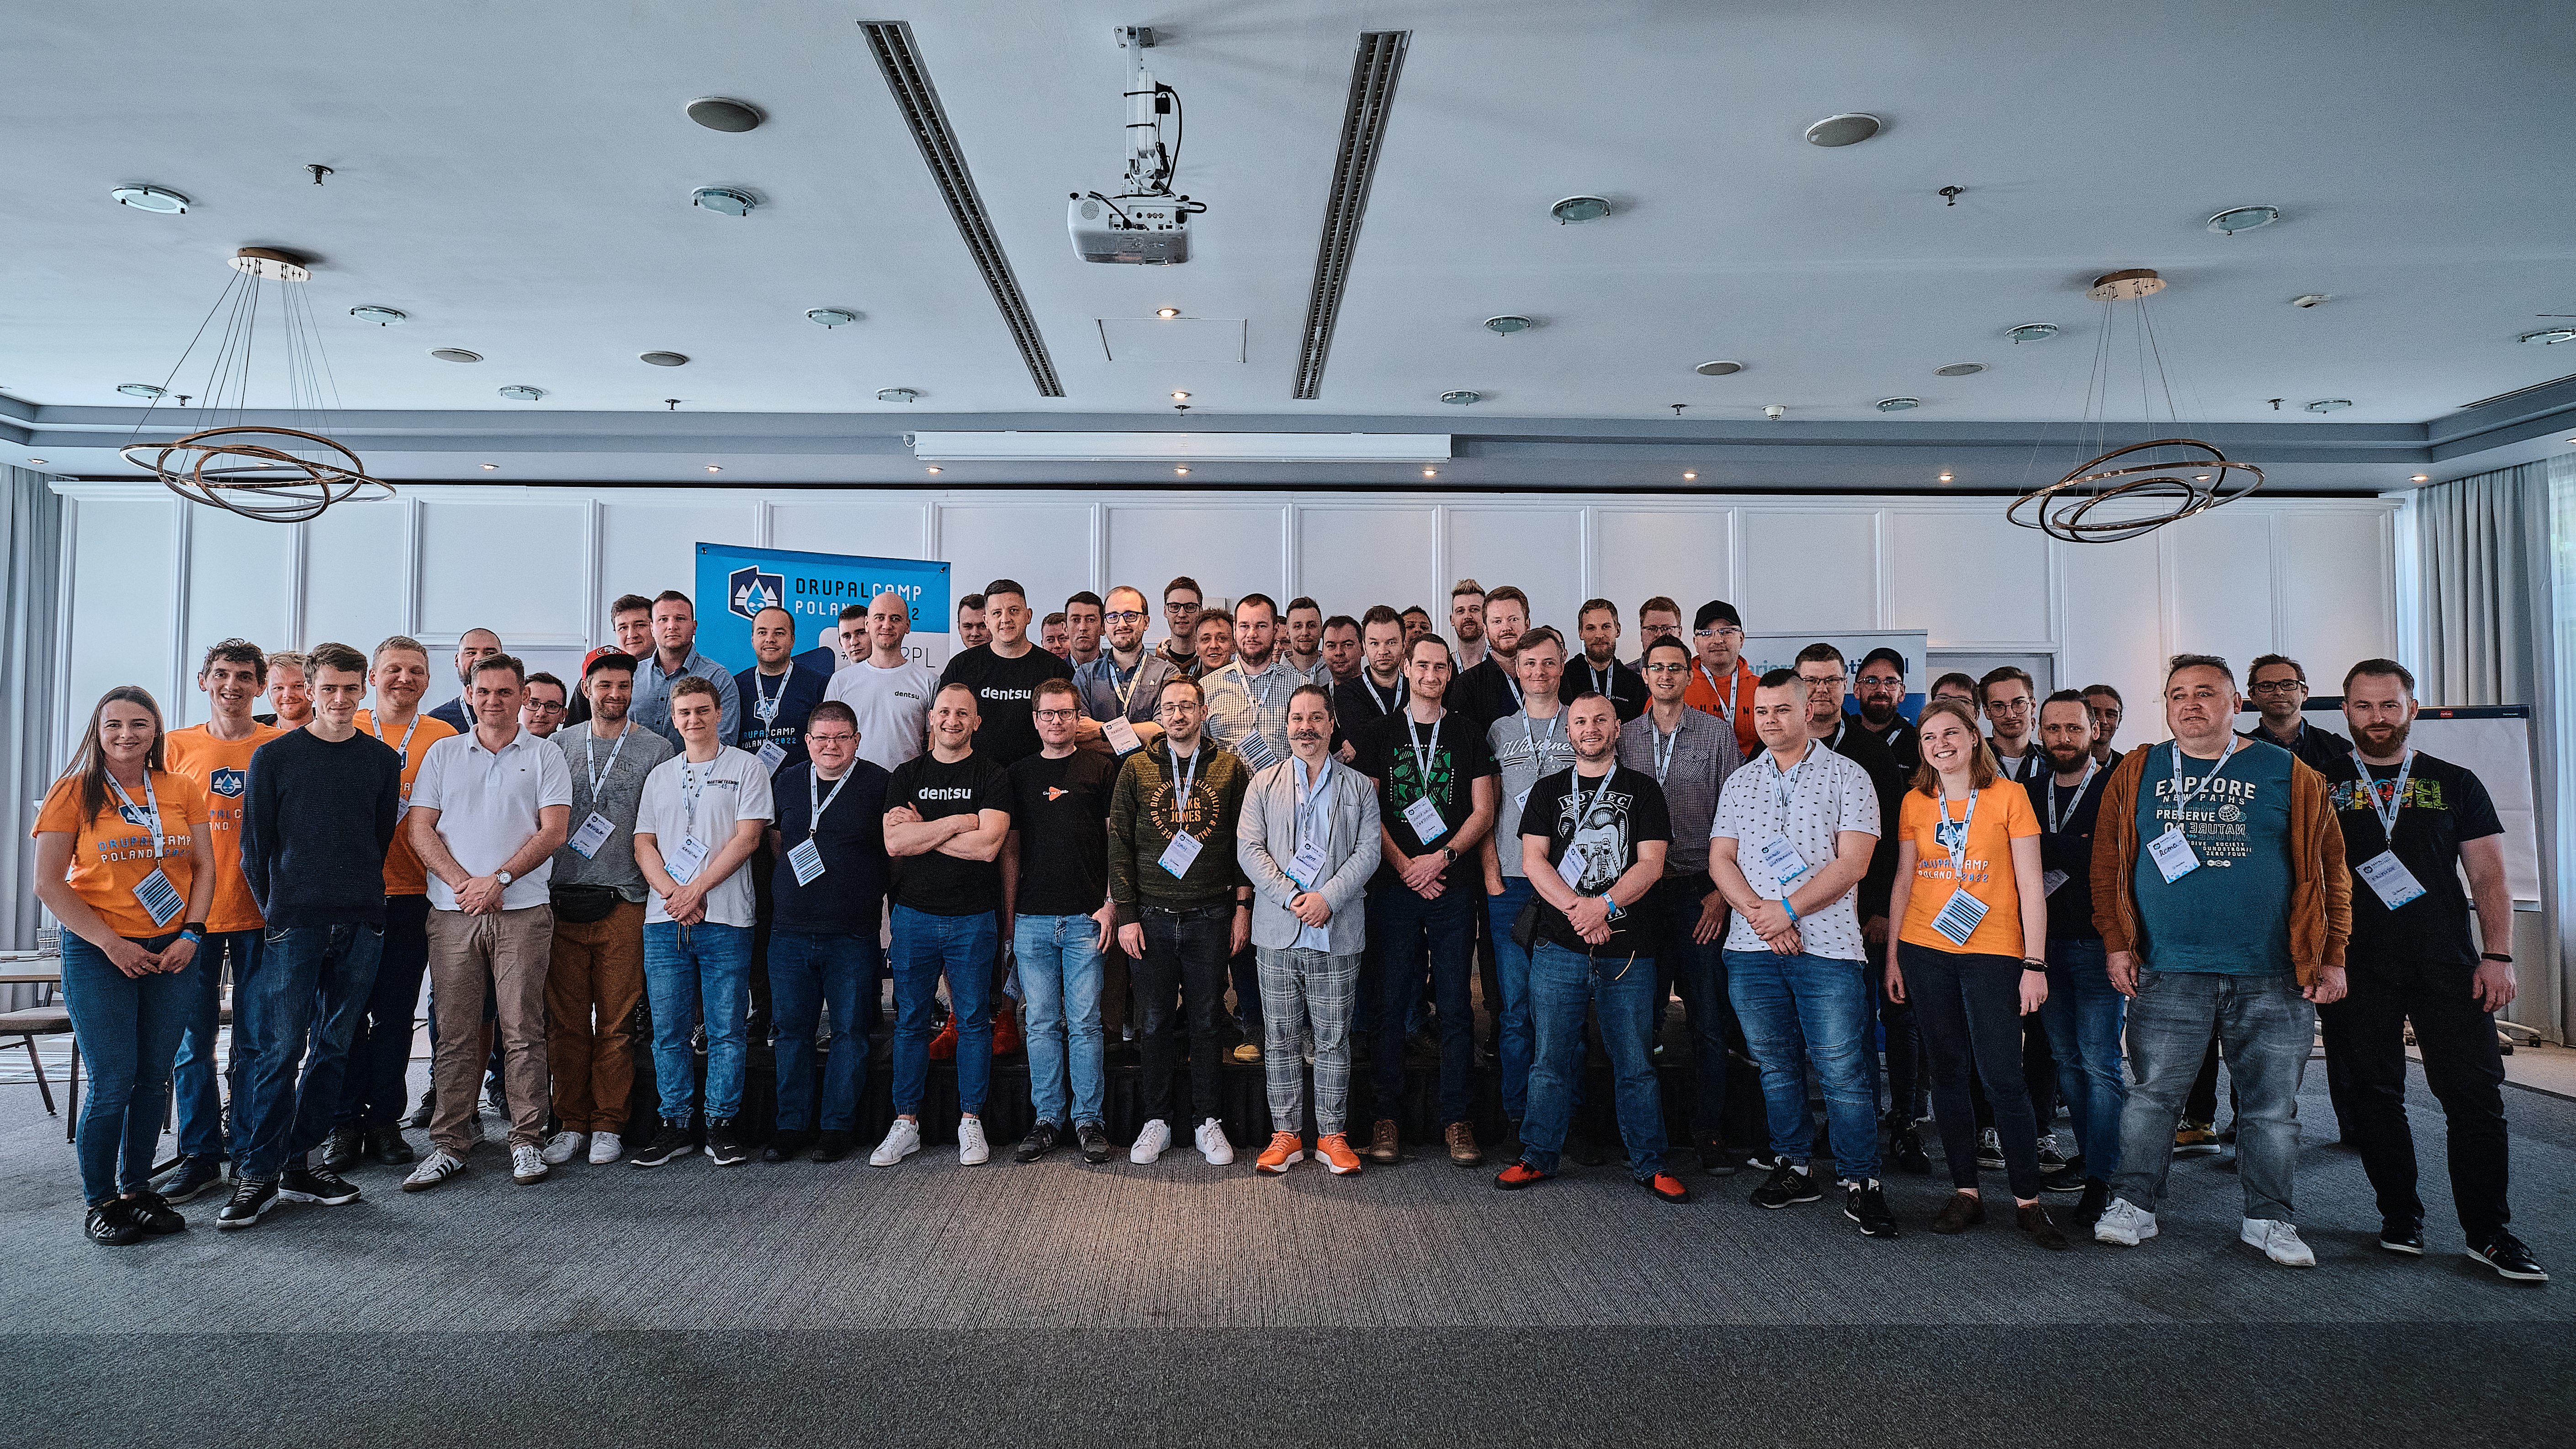 A group of participants and speakers of the DrupalCamp Poland conference, which took place in 2022